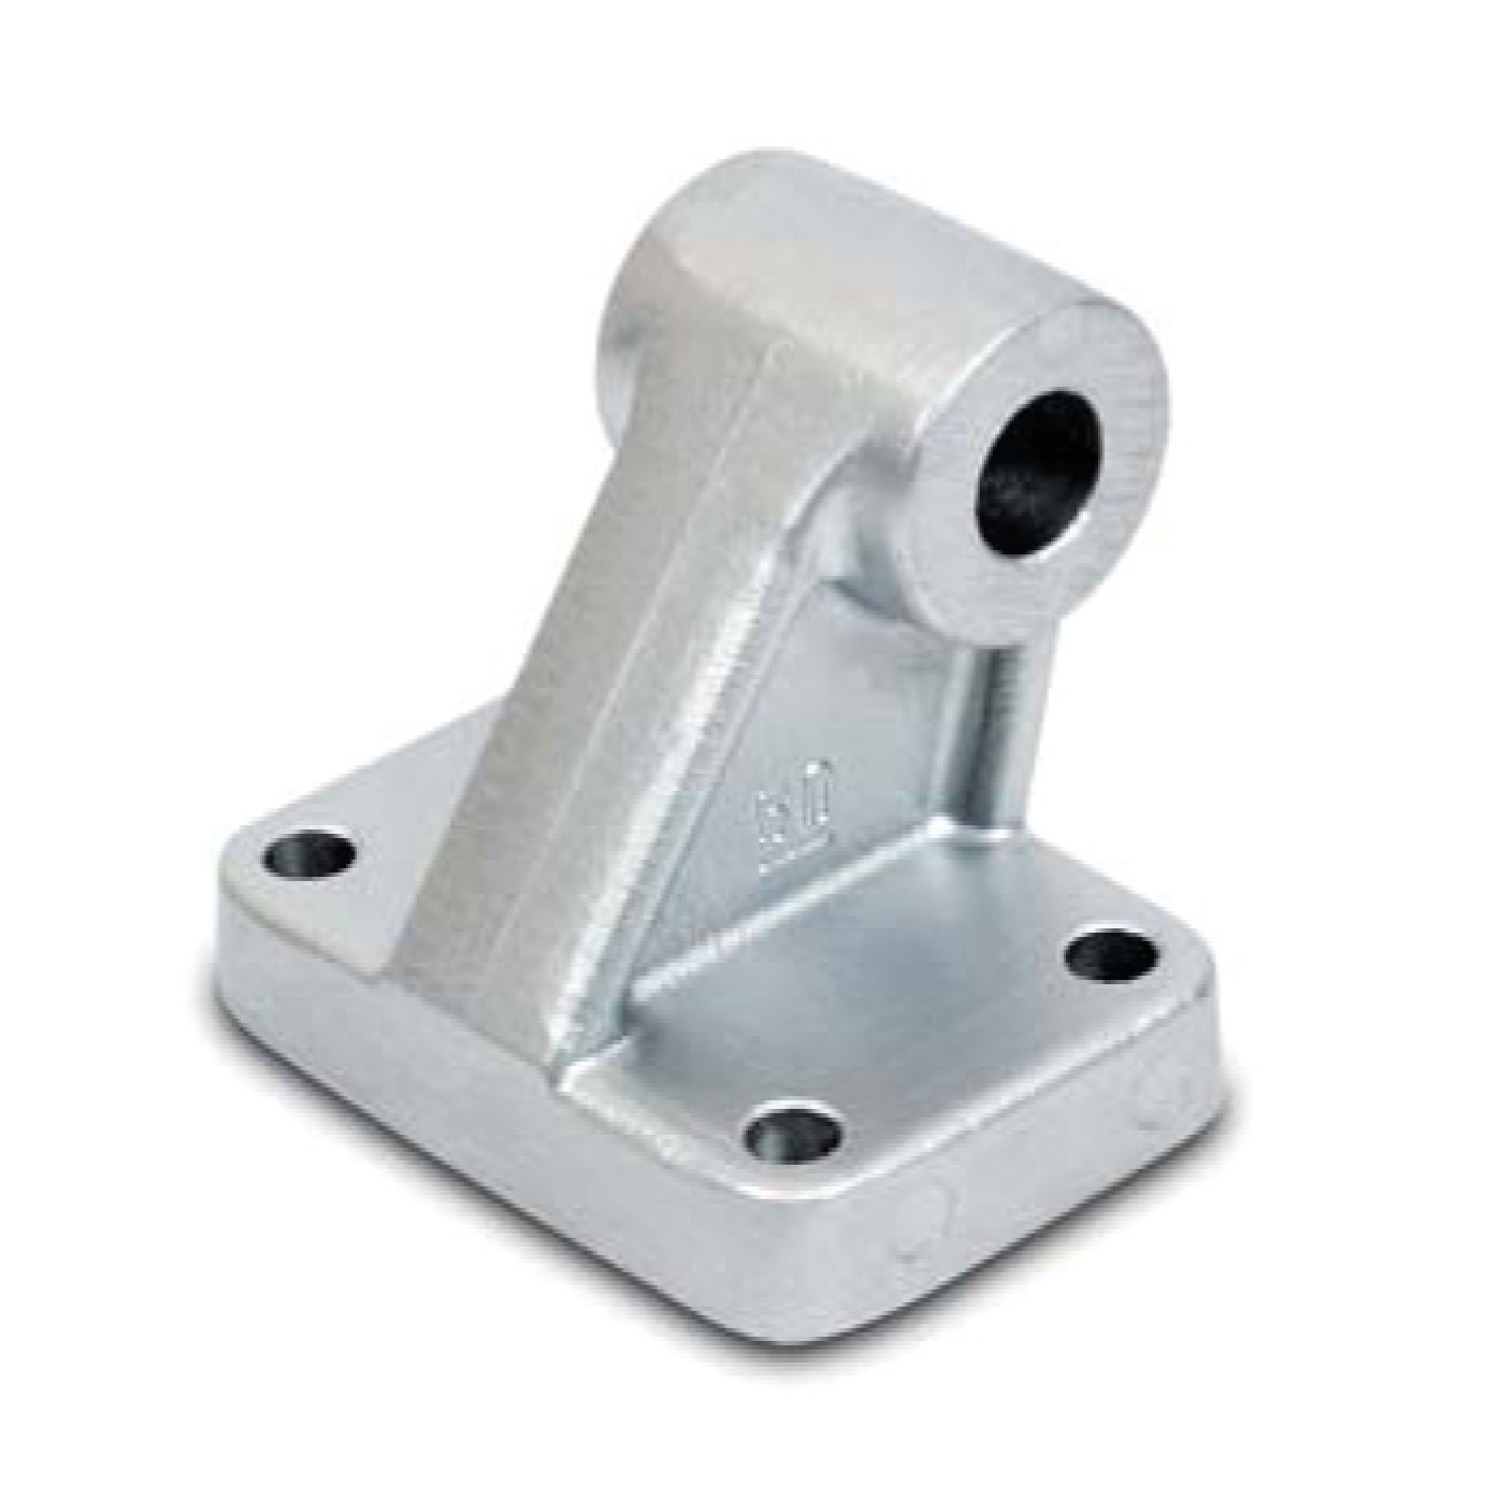 L4802 Air Cylinder Mounts - ISO Series